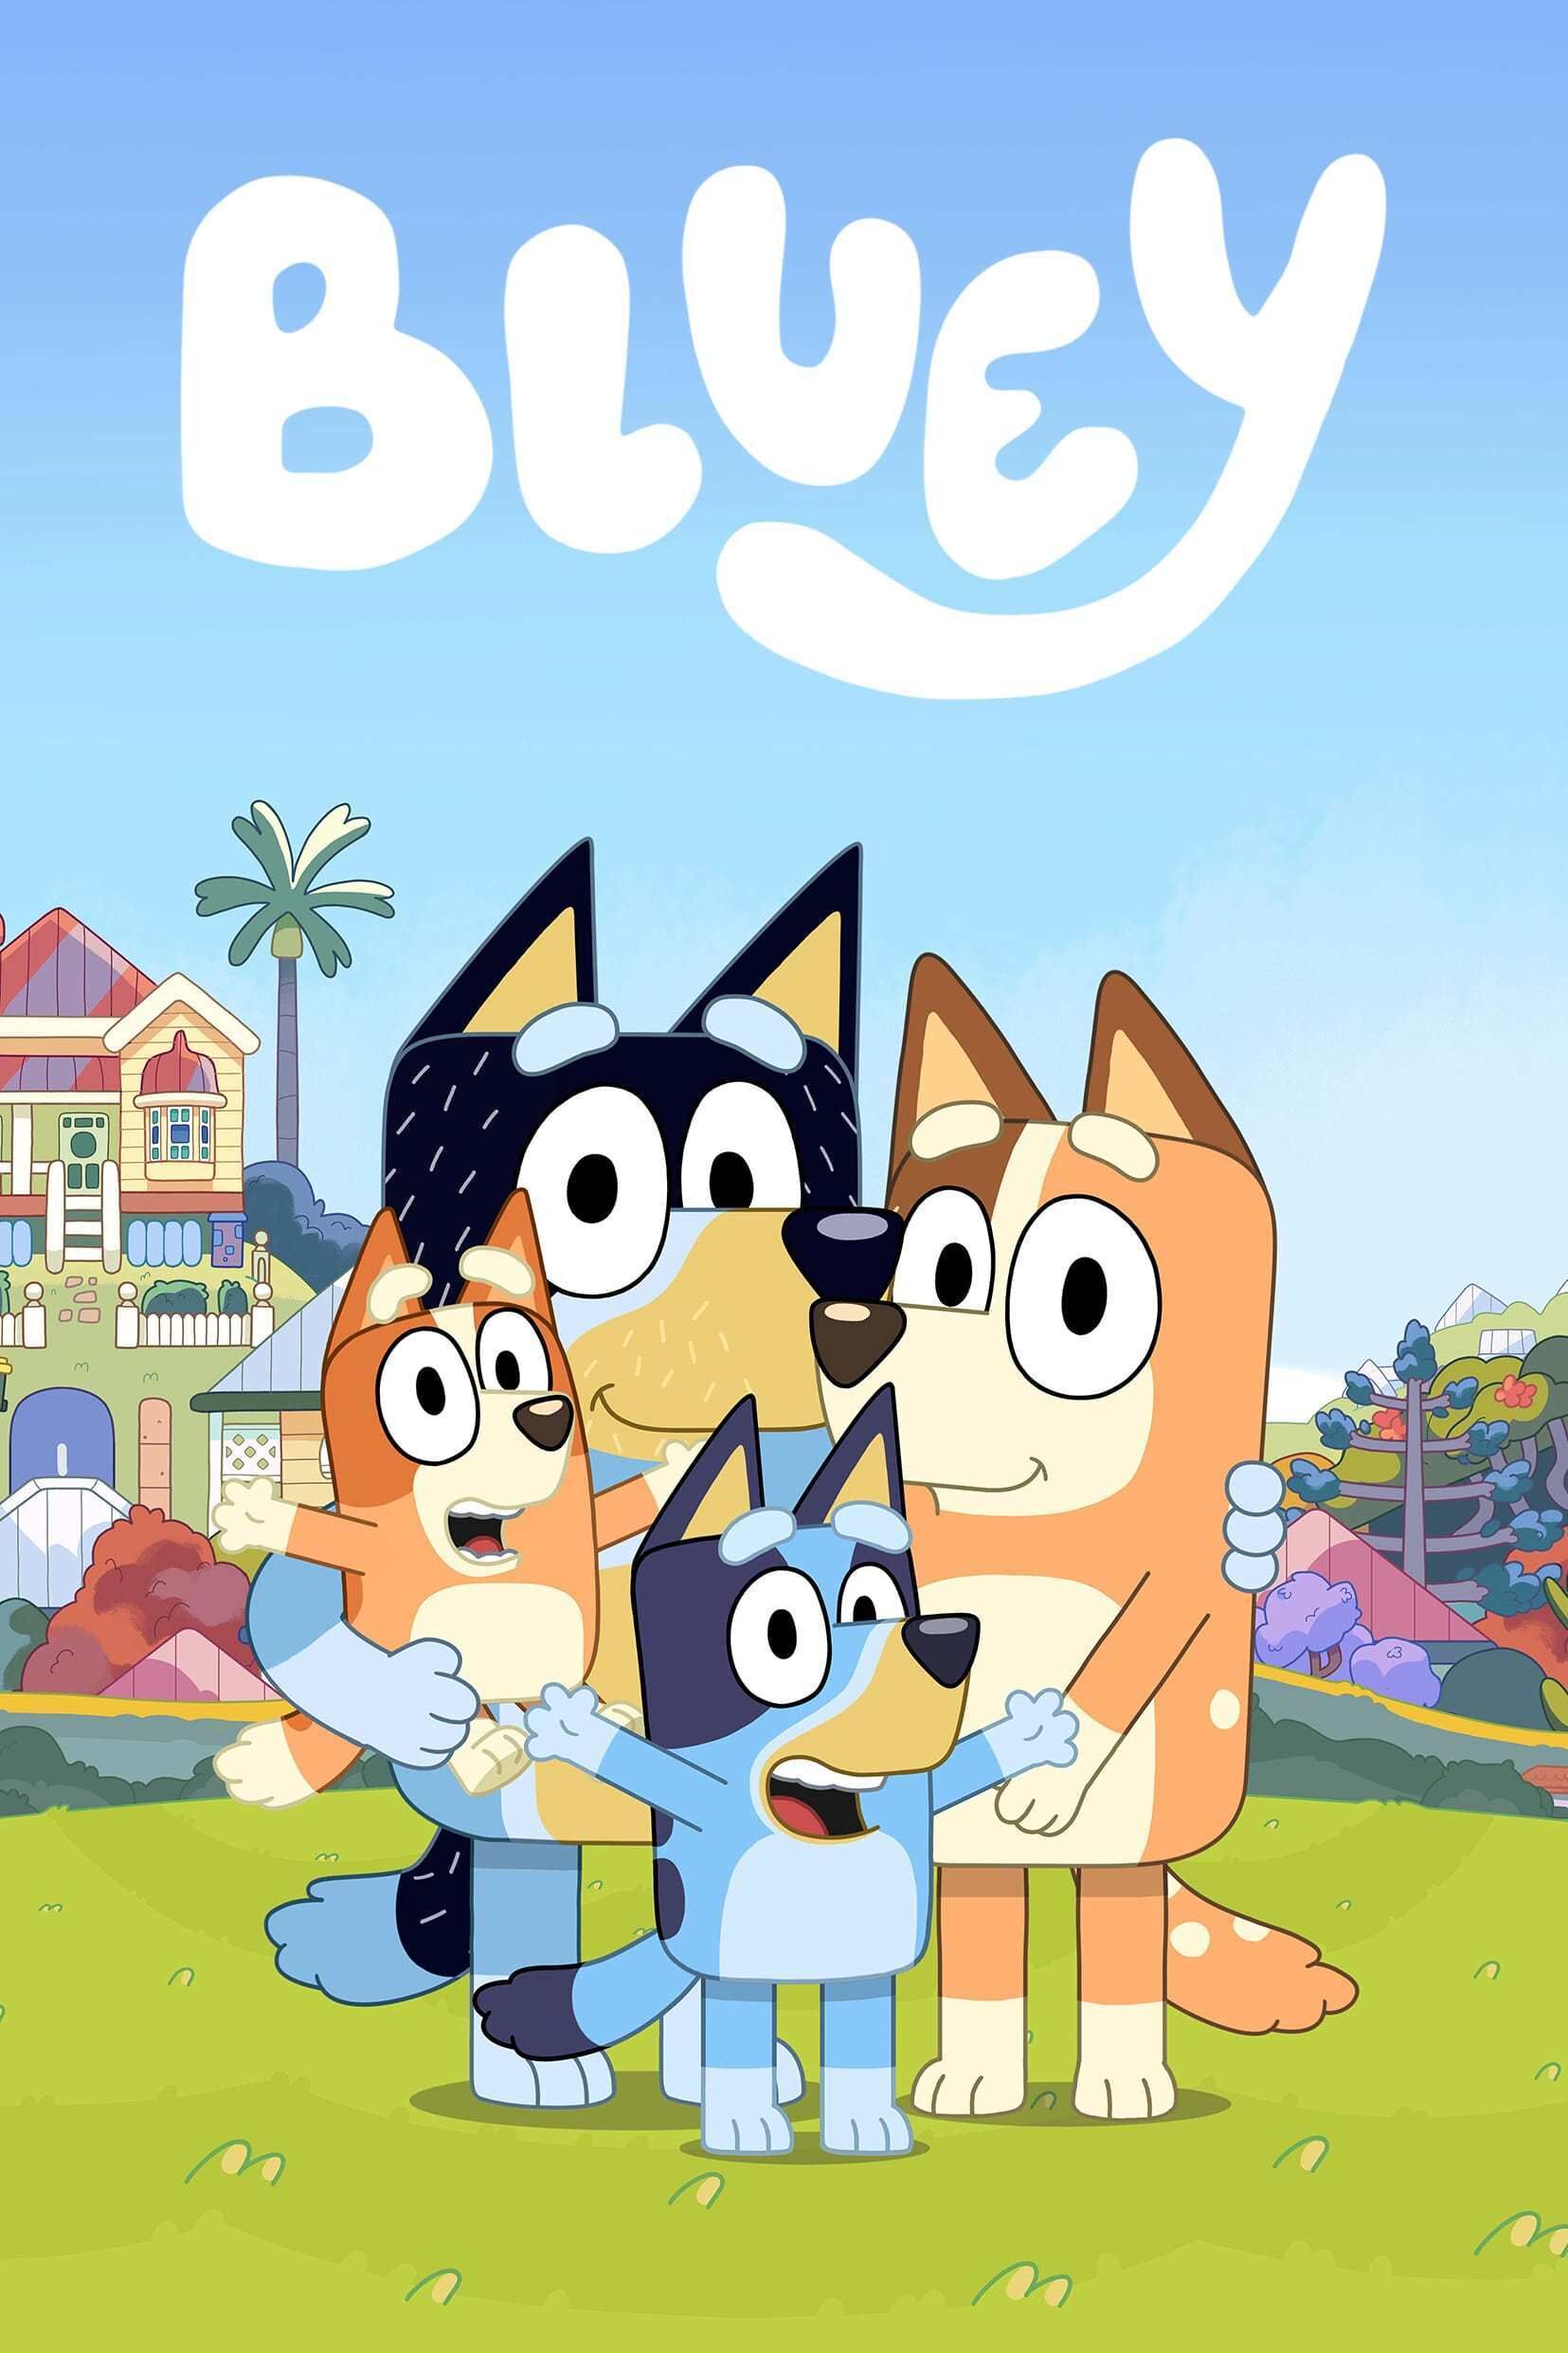 Talking Bluey - switch adapted from Technical Solutions Australia